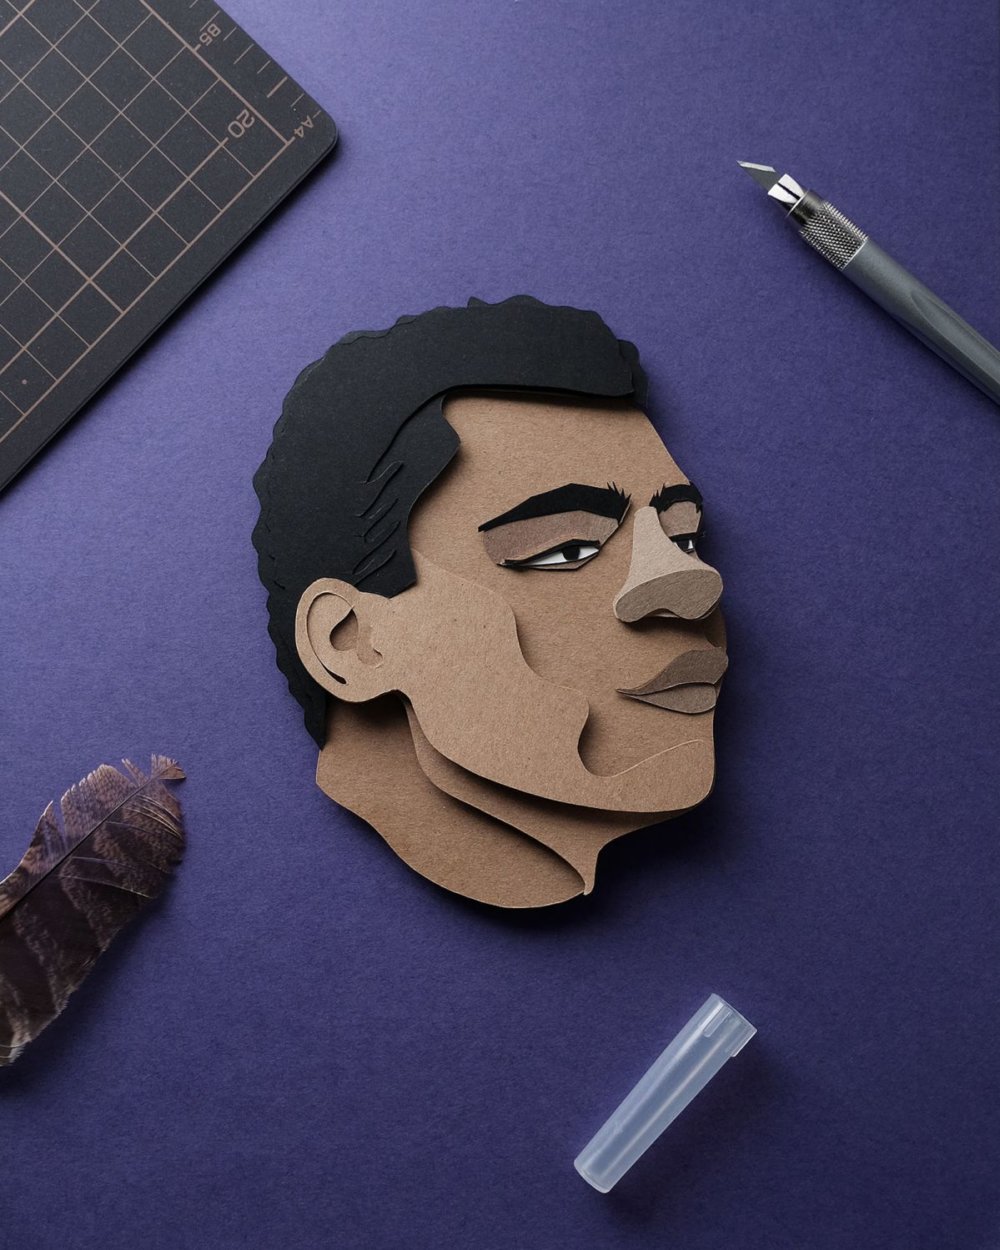 Famous People And Iconic Characters Of Pop Culture In Astonishing Paper Cuttings Of John Ed De Vera 18